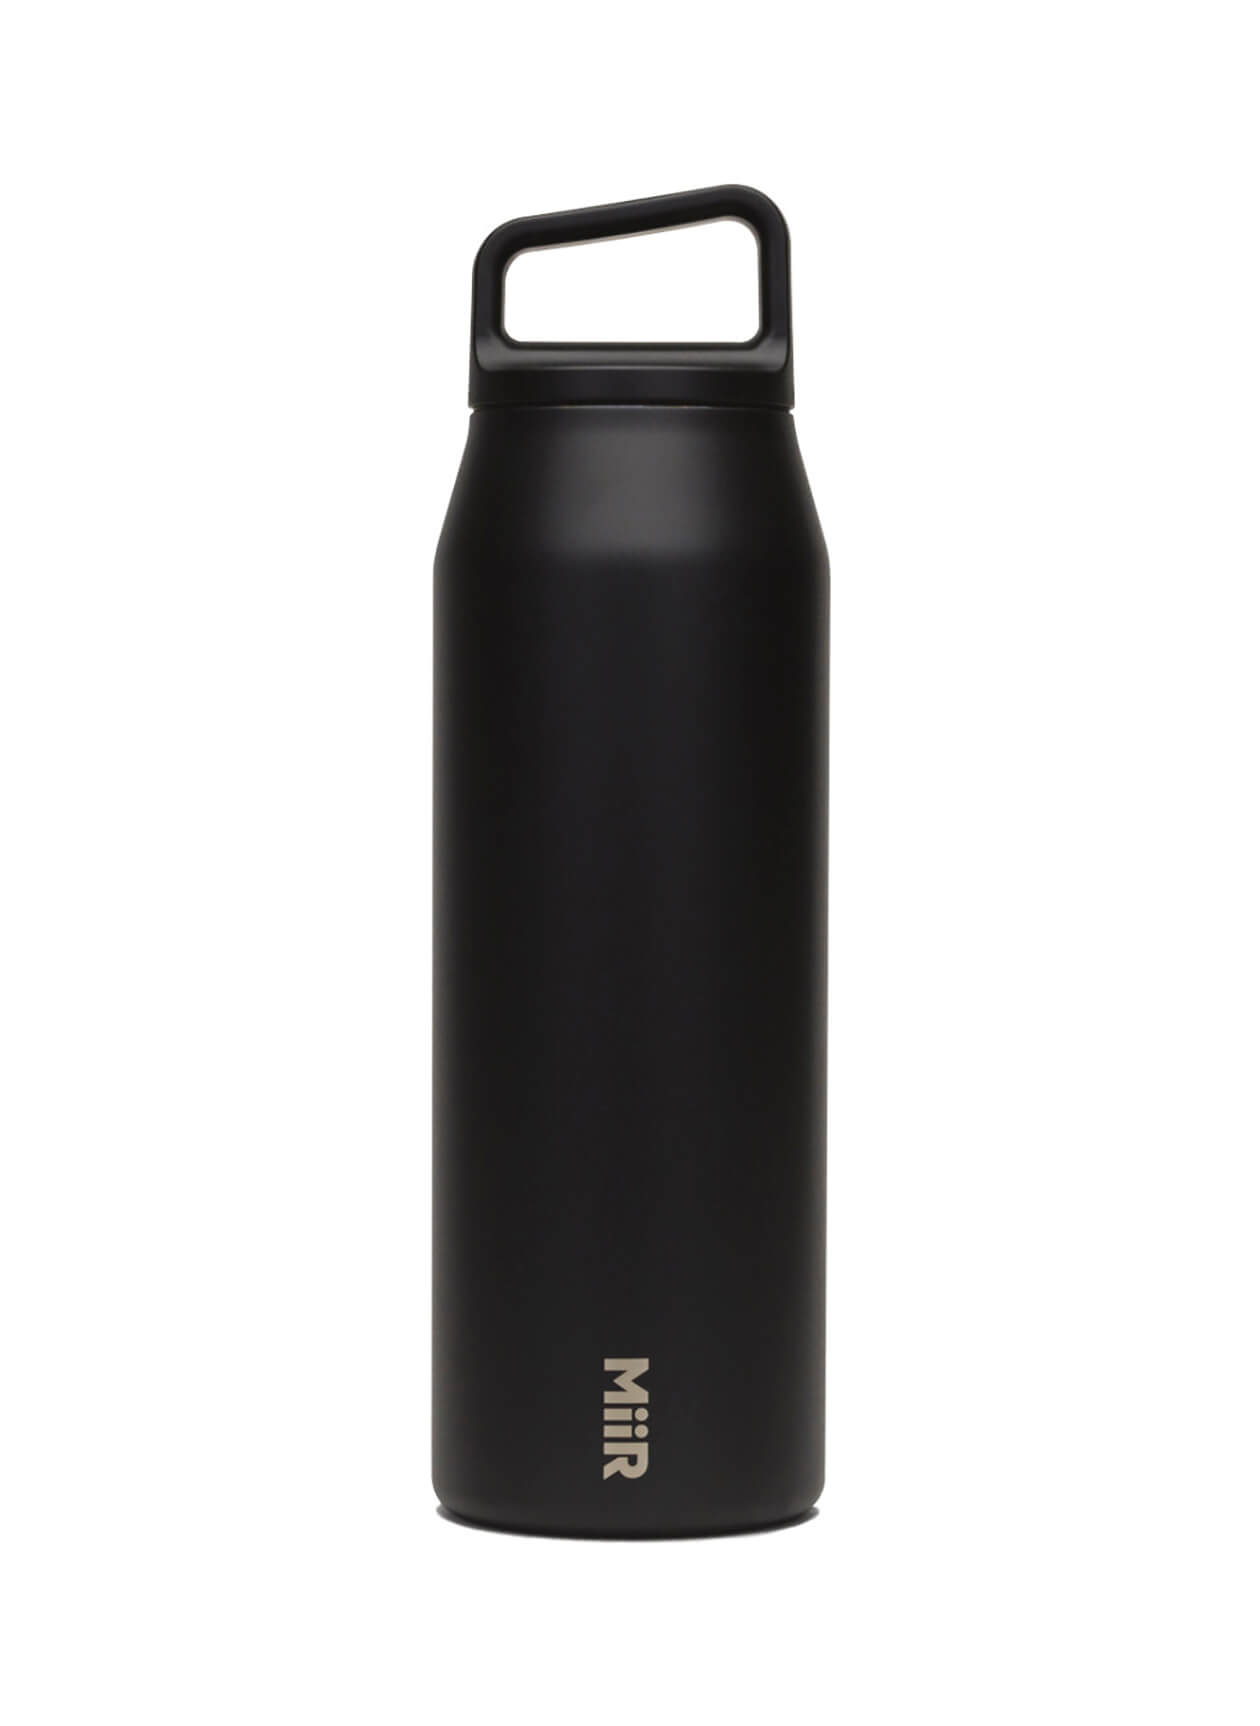 Miir Black Powder Vacuum Insulated Wide Mouth Bottle - 32 oz